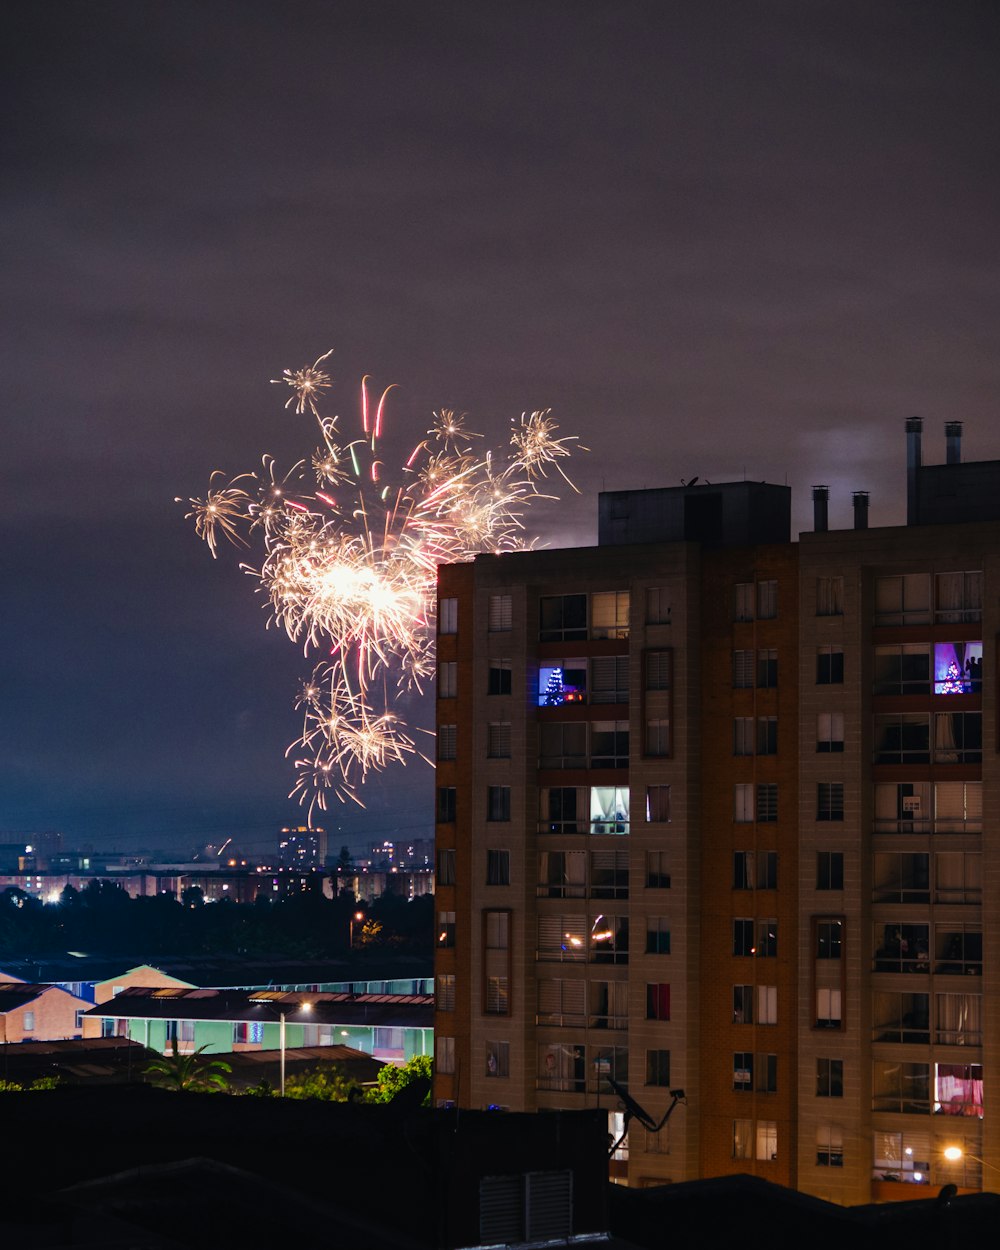 fireworks are lit up in the night sky over a city